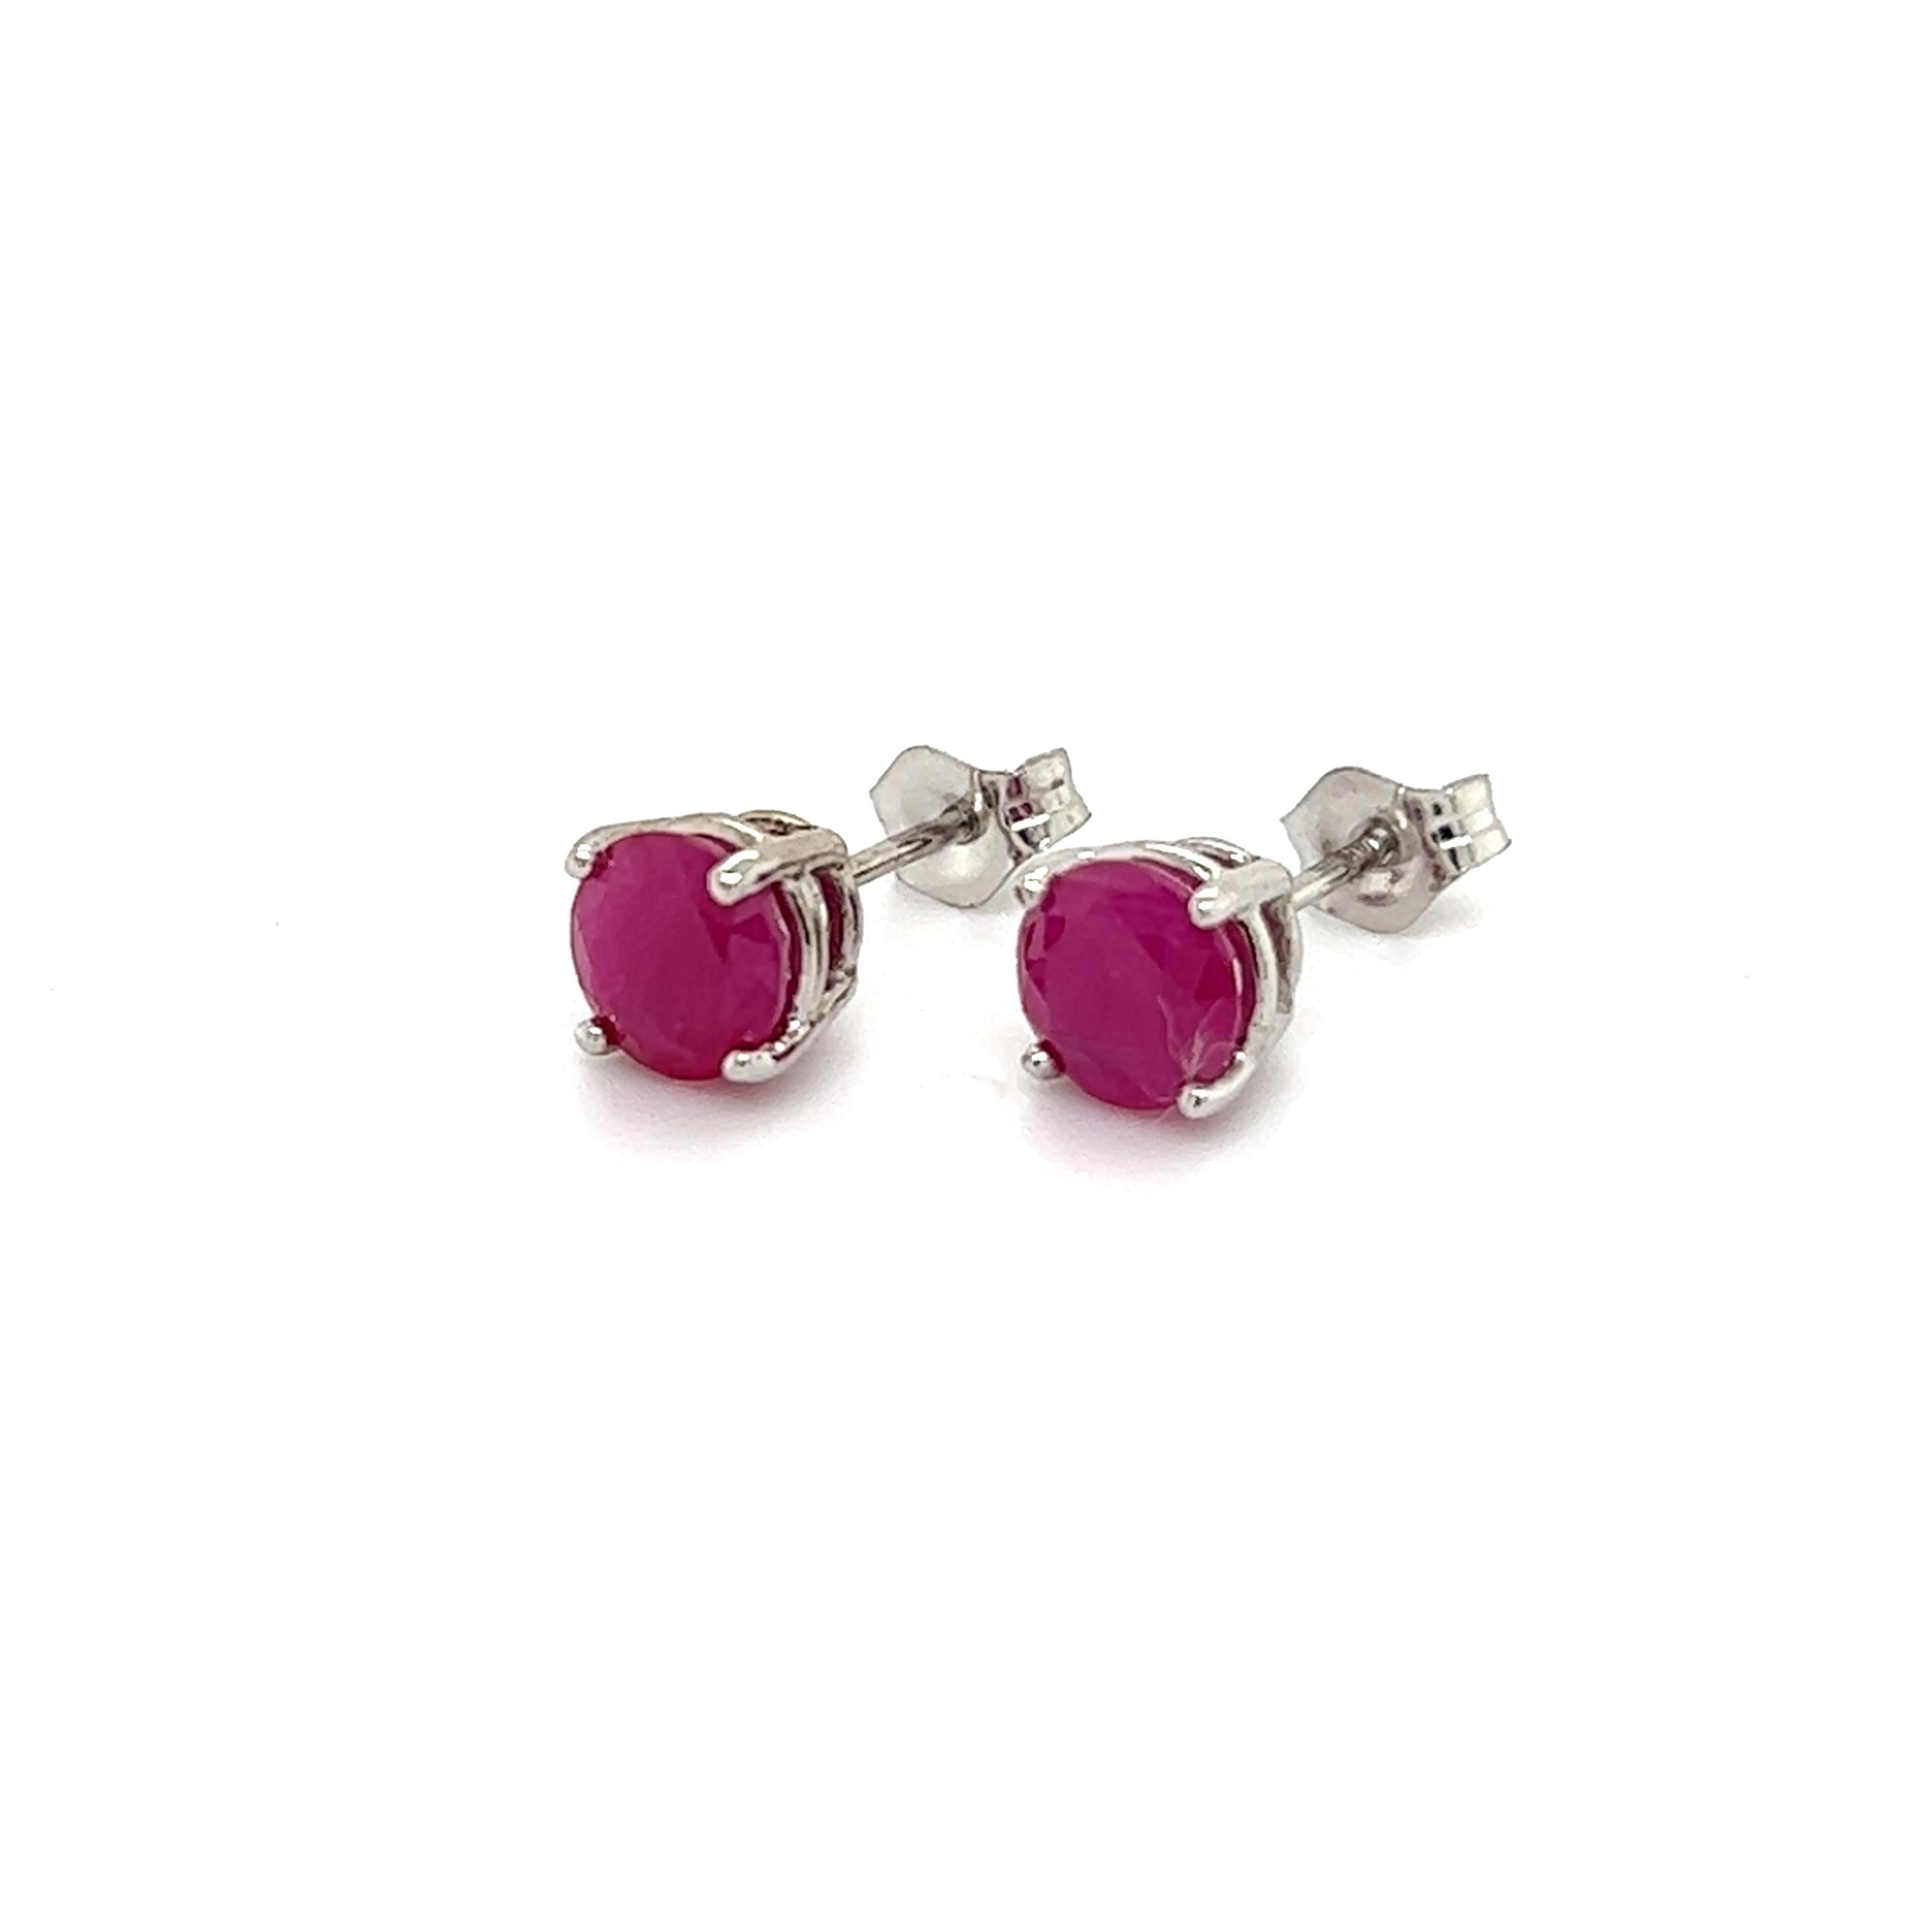 Natural Round Ruby Stud Earrings 14k Gold 1.91 TCW 1.28 Grams Certified $2,290 210750

This is a Unique Custom Made Glamorous Piece of Jewelry!

Nothing says, “I Love you” more than Diamonds and Pearls!

These Ruby earrings have been Certified,